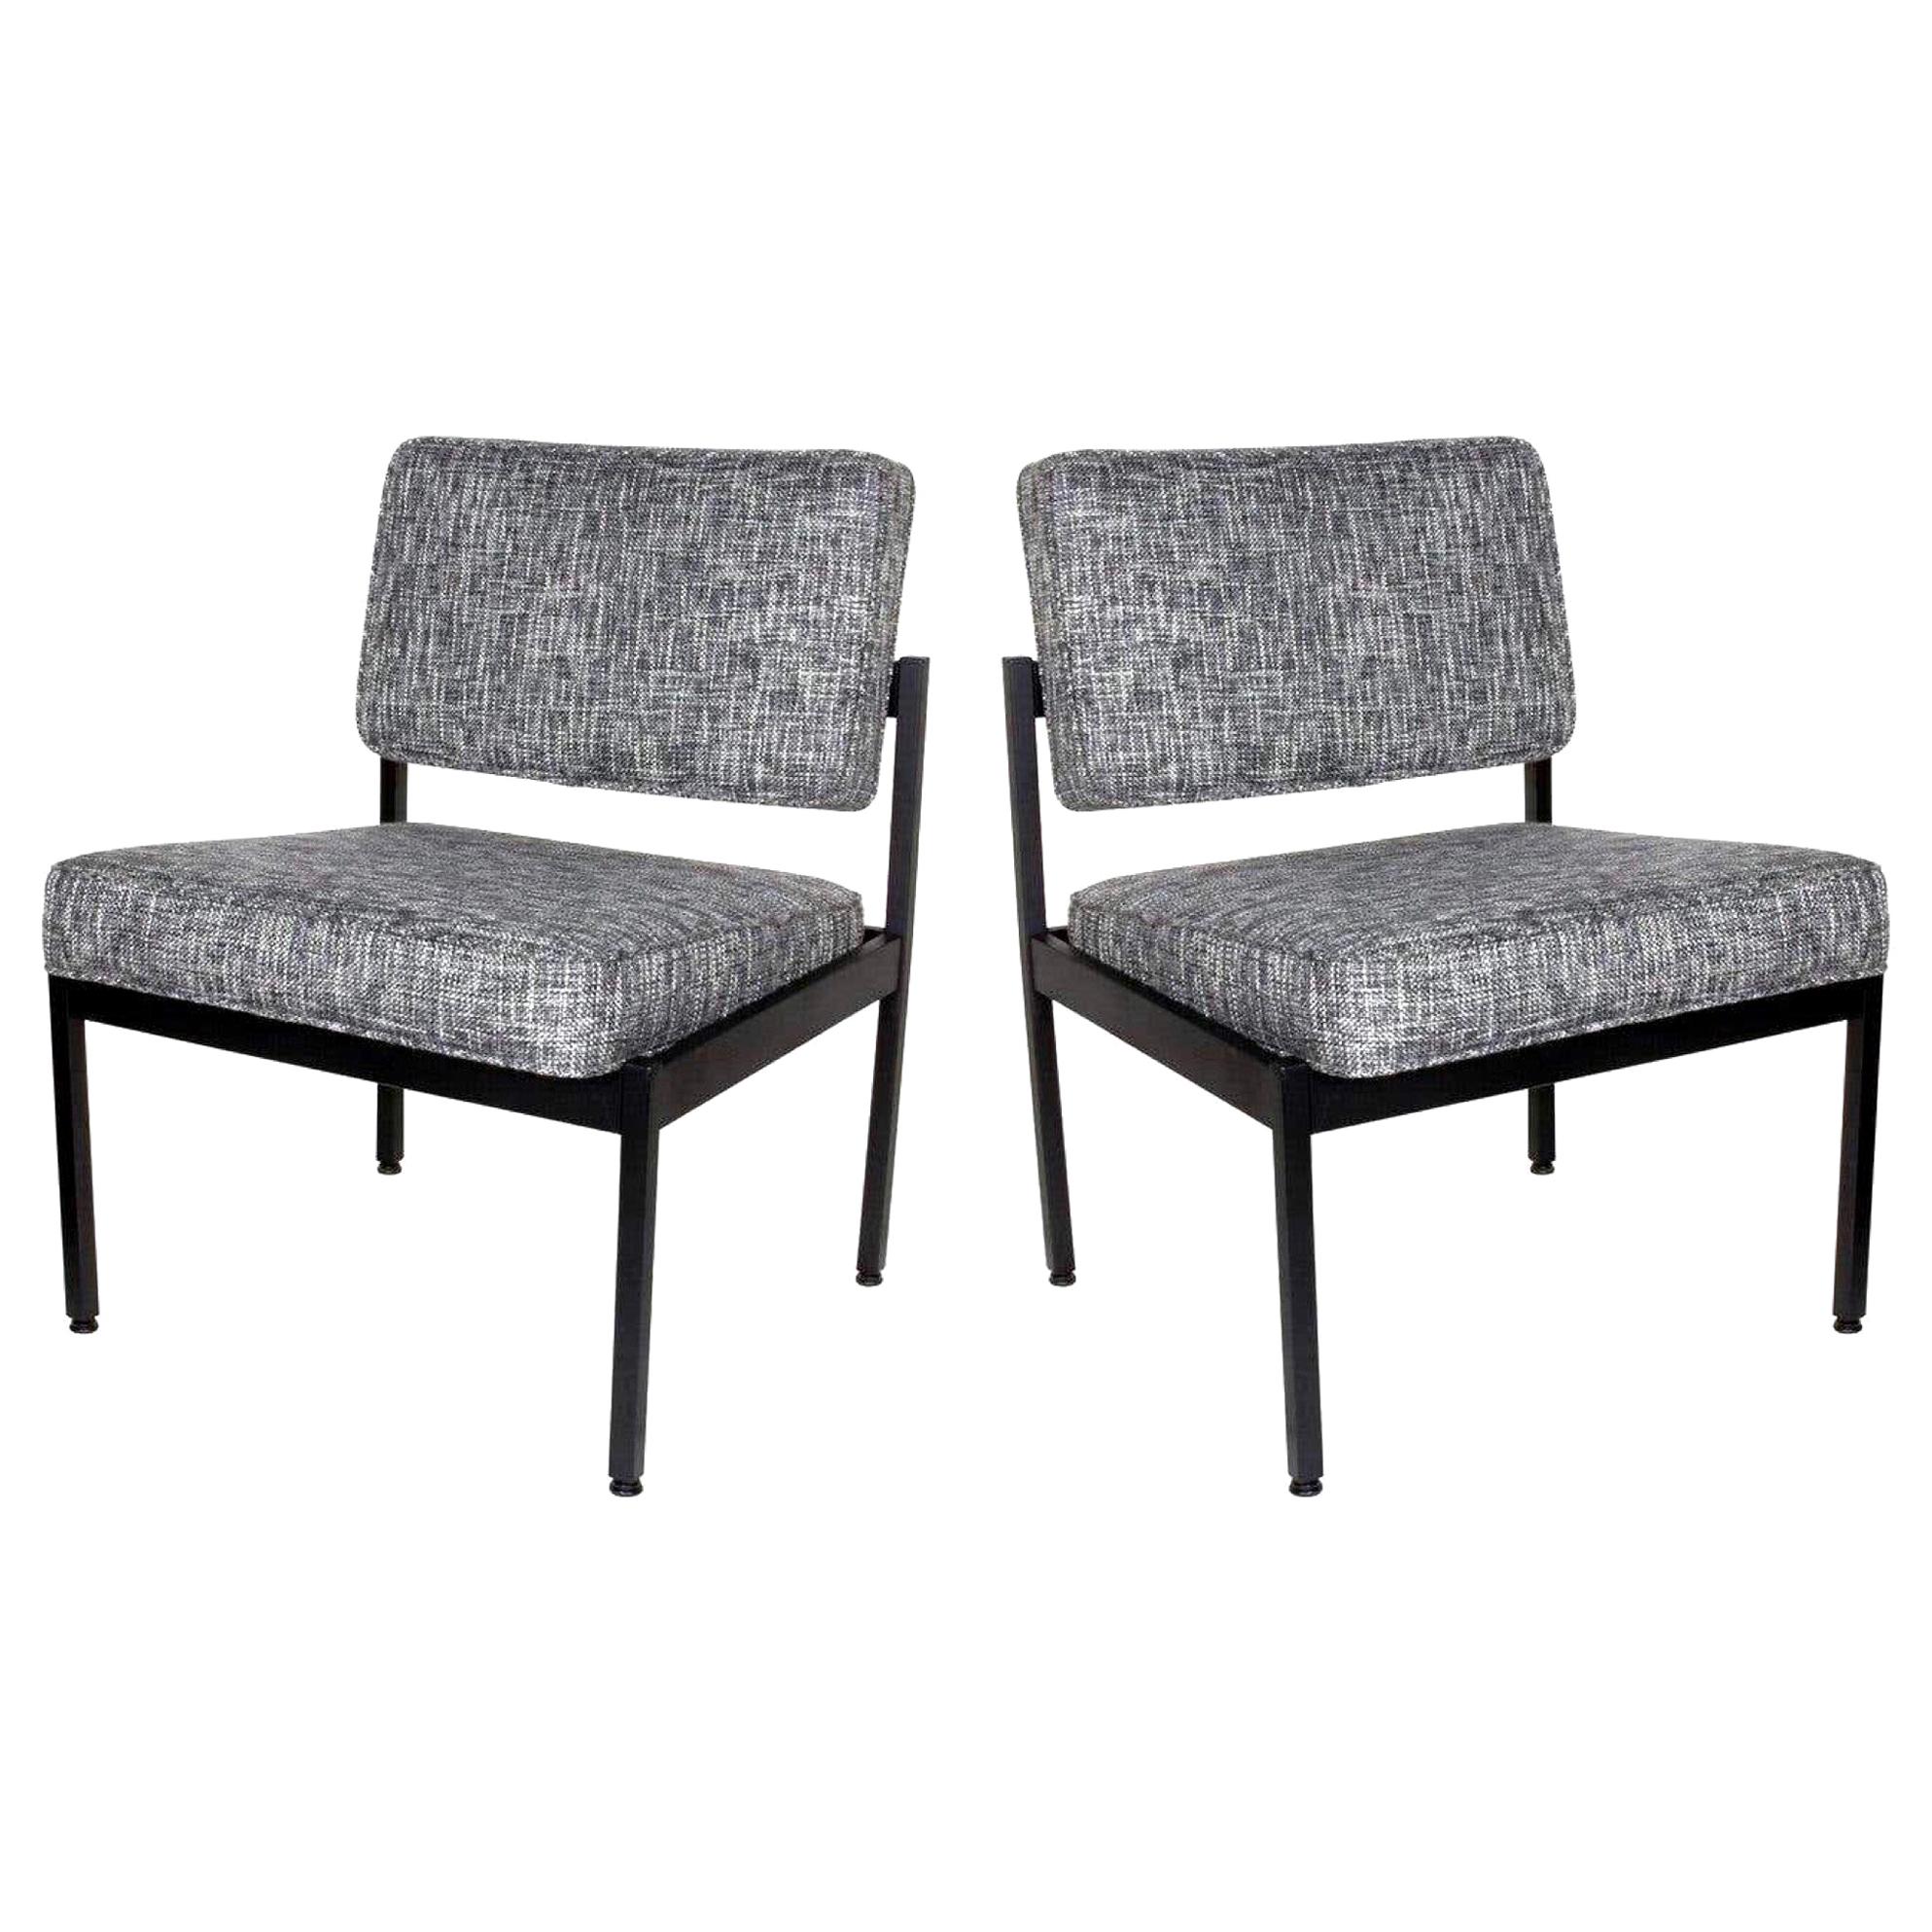 Pair of Mid-Century Modern Tweed Industrial Chairs in the Style of Knoll